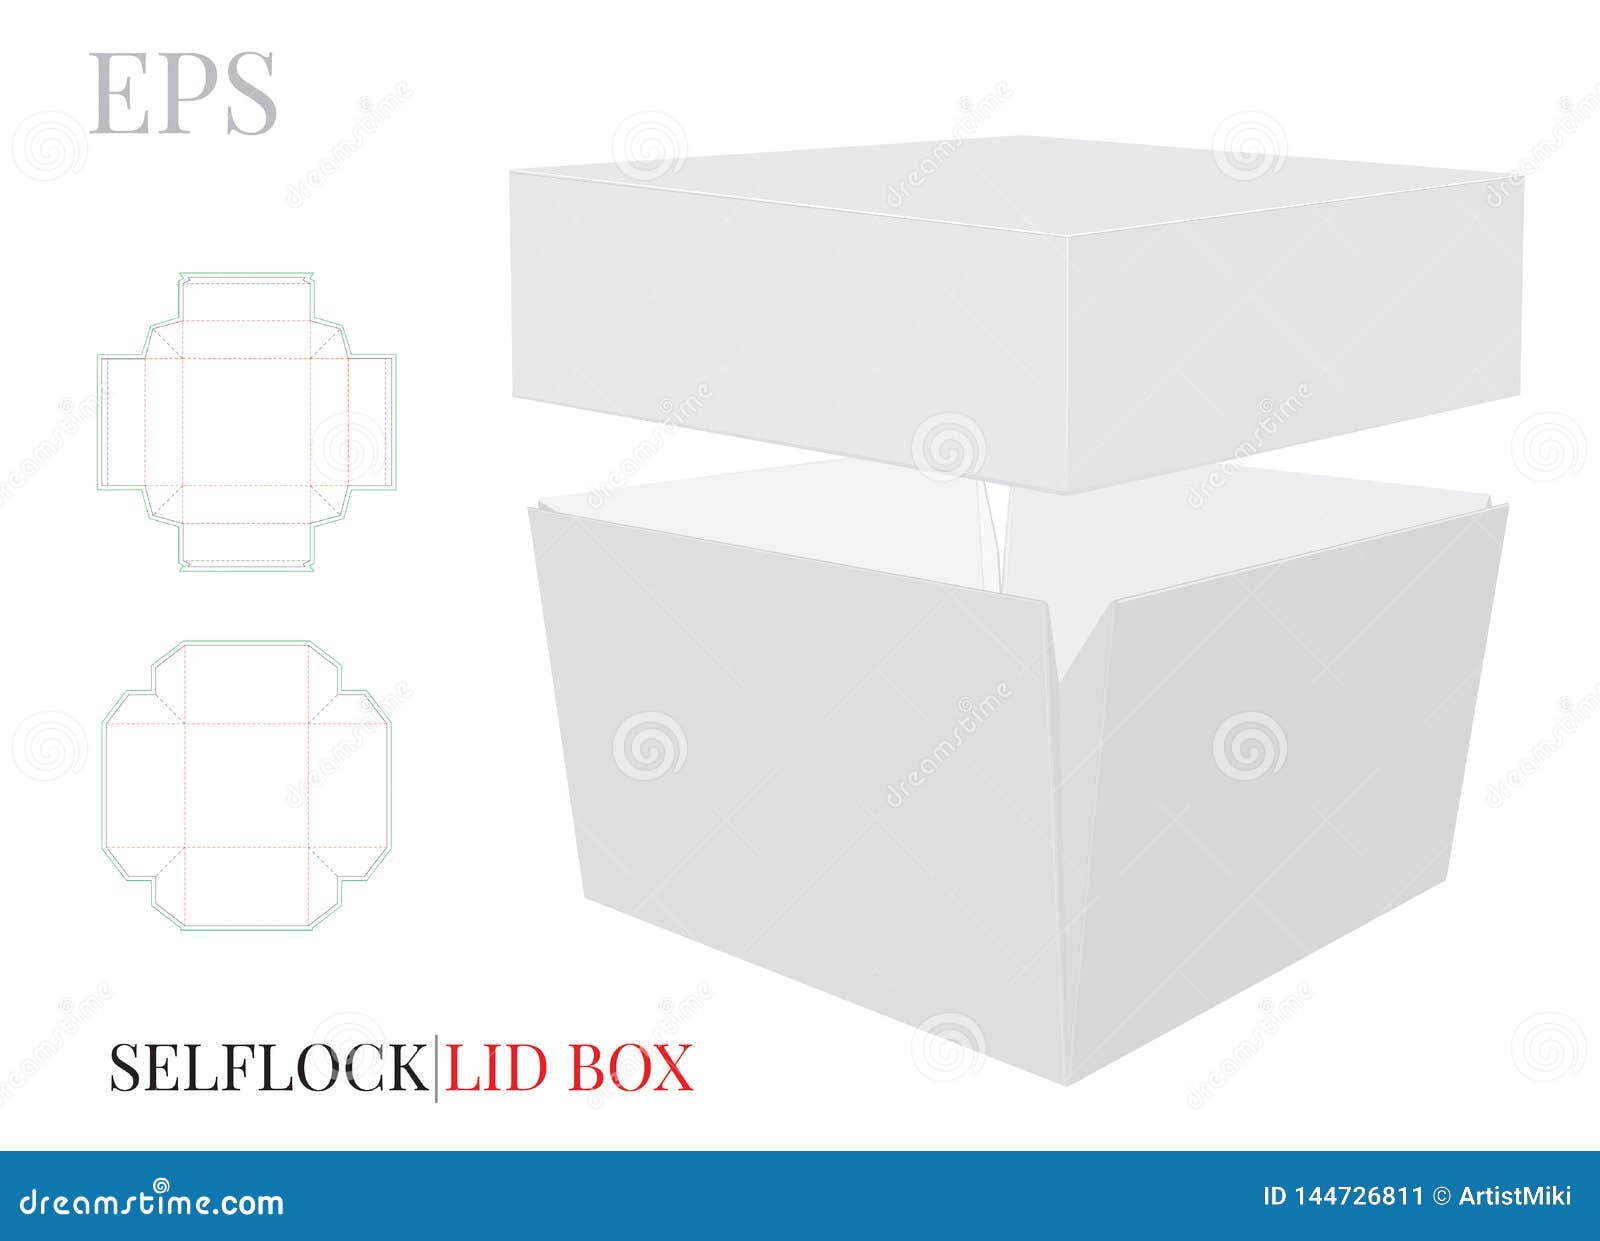 box with lid template.  with die cut / laser cut layers. white, clear, blank,  square box with lid mock up